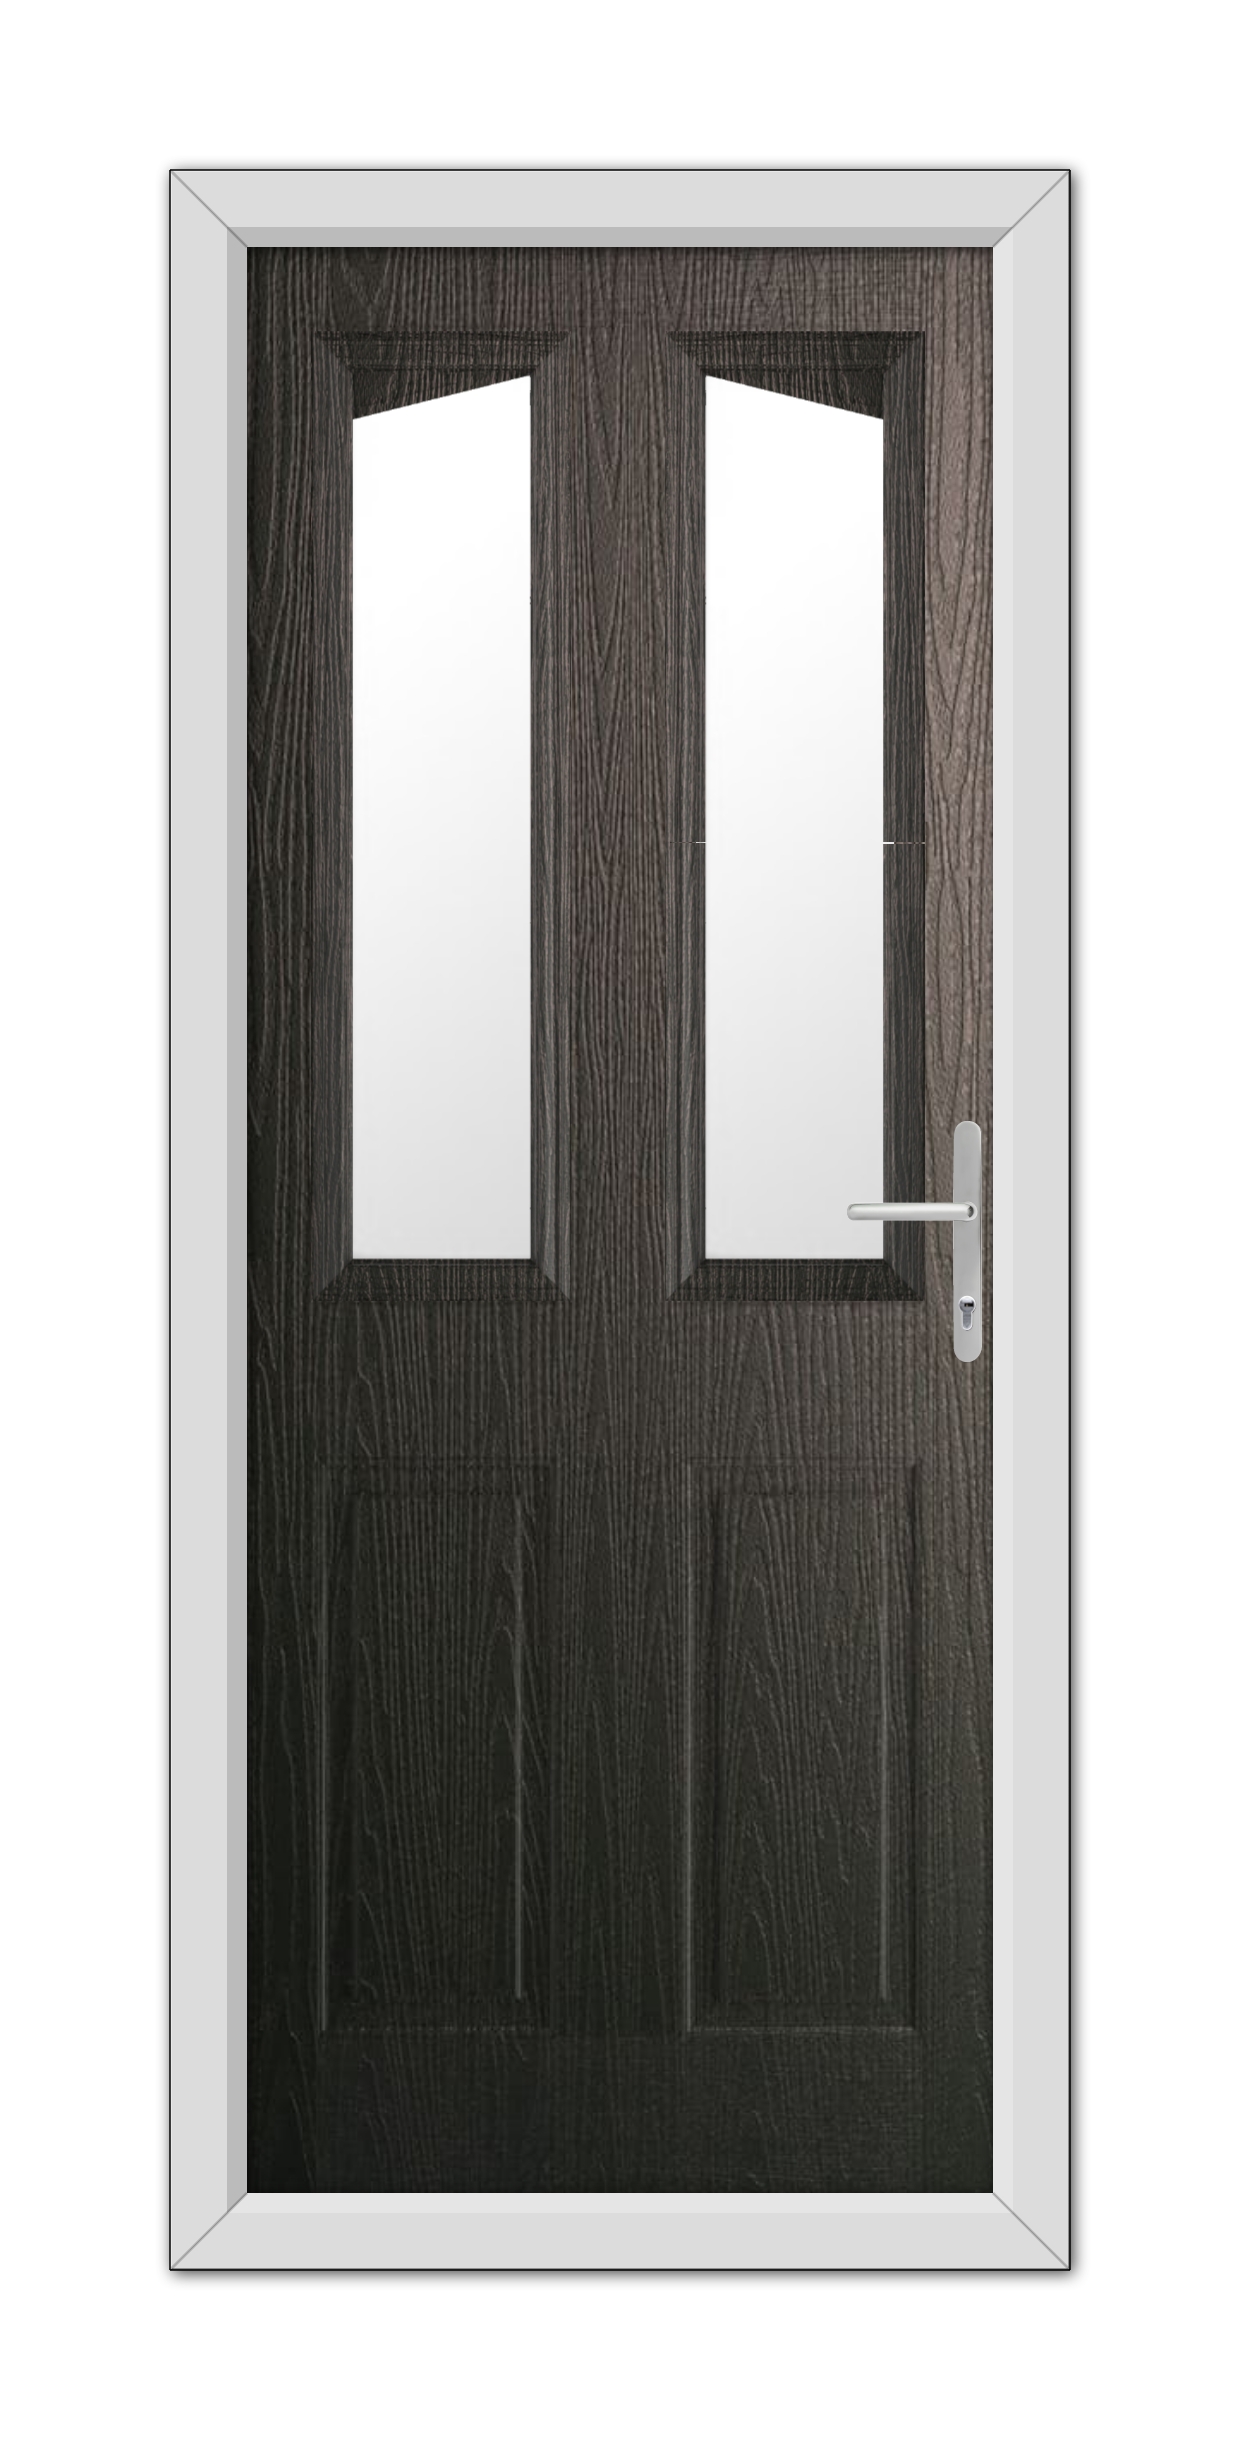 Schwarzbraun Highbury Composite Door 48mm Timber Core with twin rectangular glass panels and a metallic handle, set within a light grey frame, isolated on a white background.